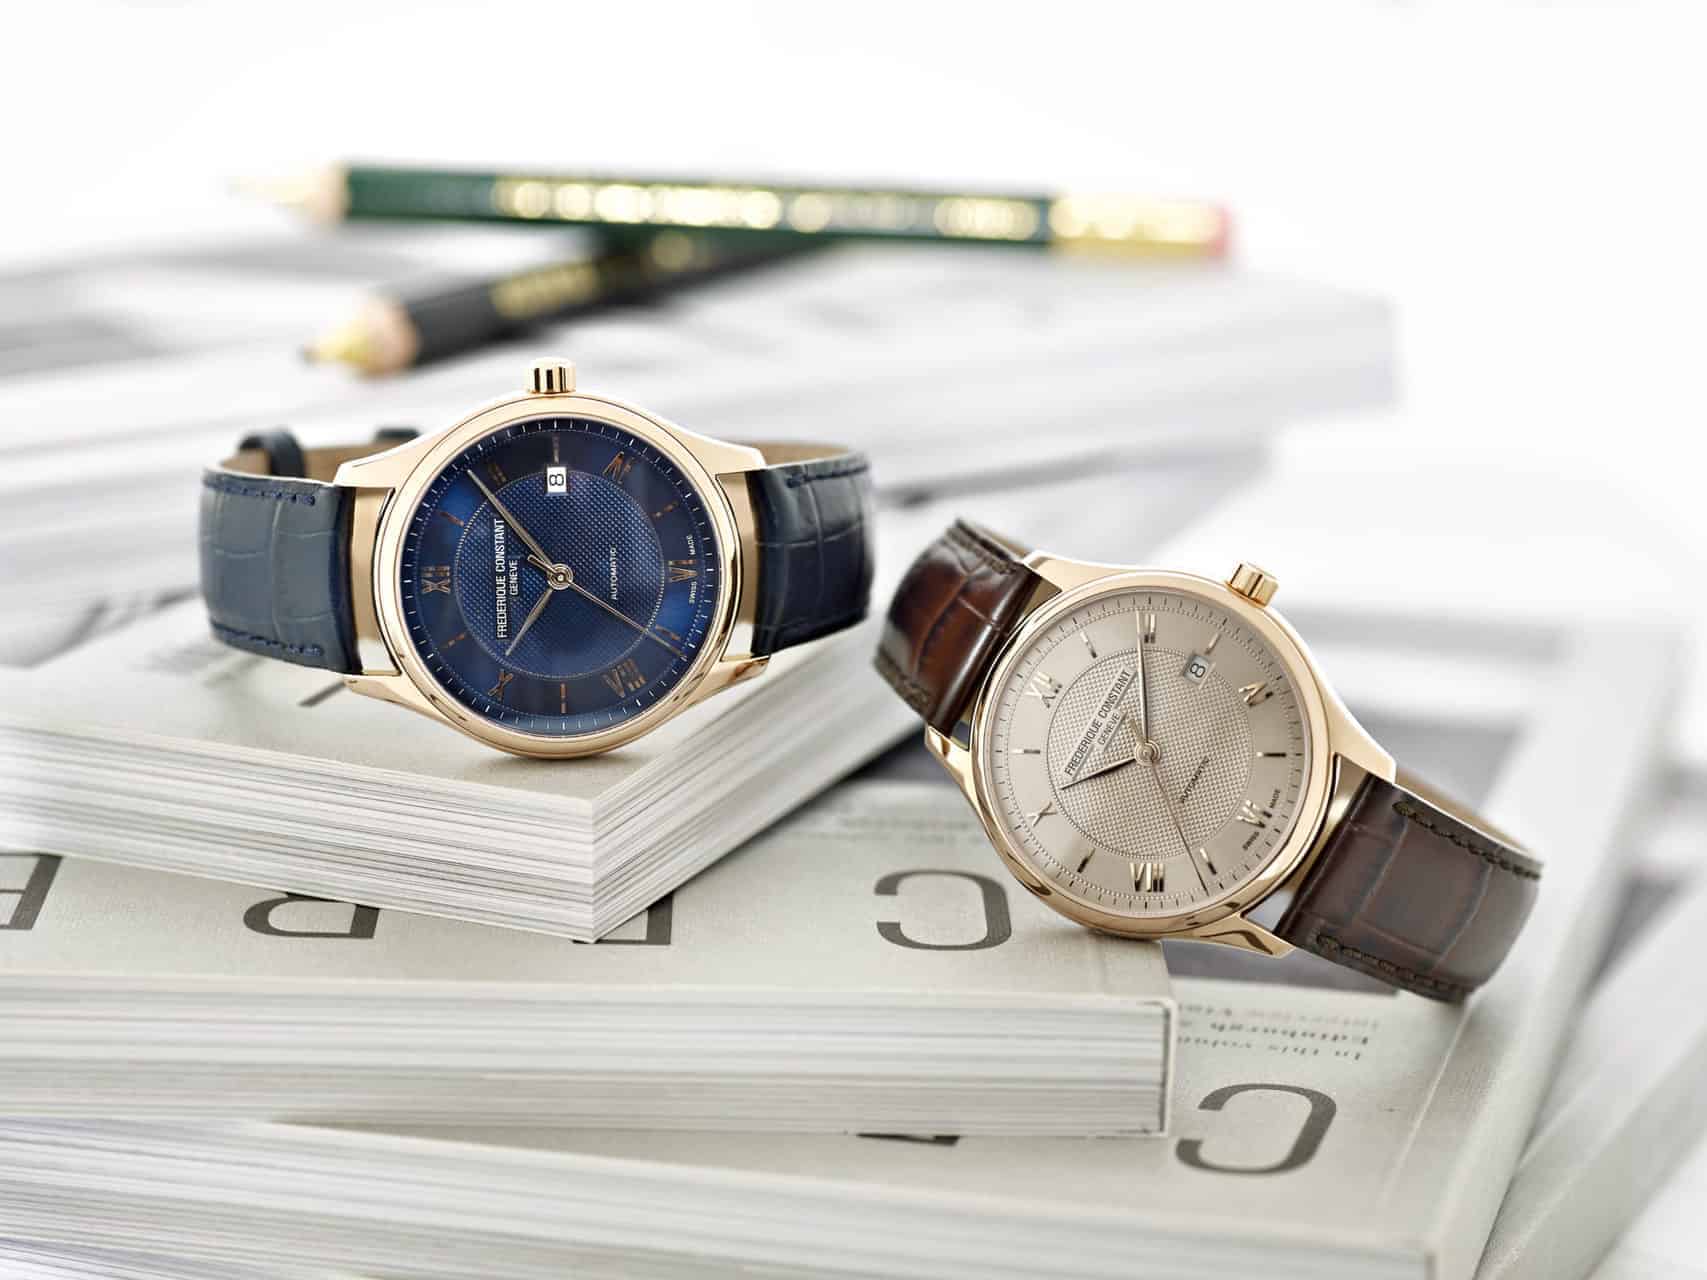 Frederique Constant’s revisits its Classics Index Automatic and Heart Beat watches